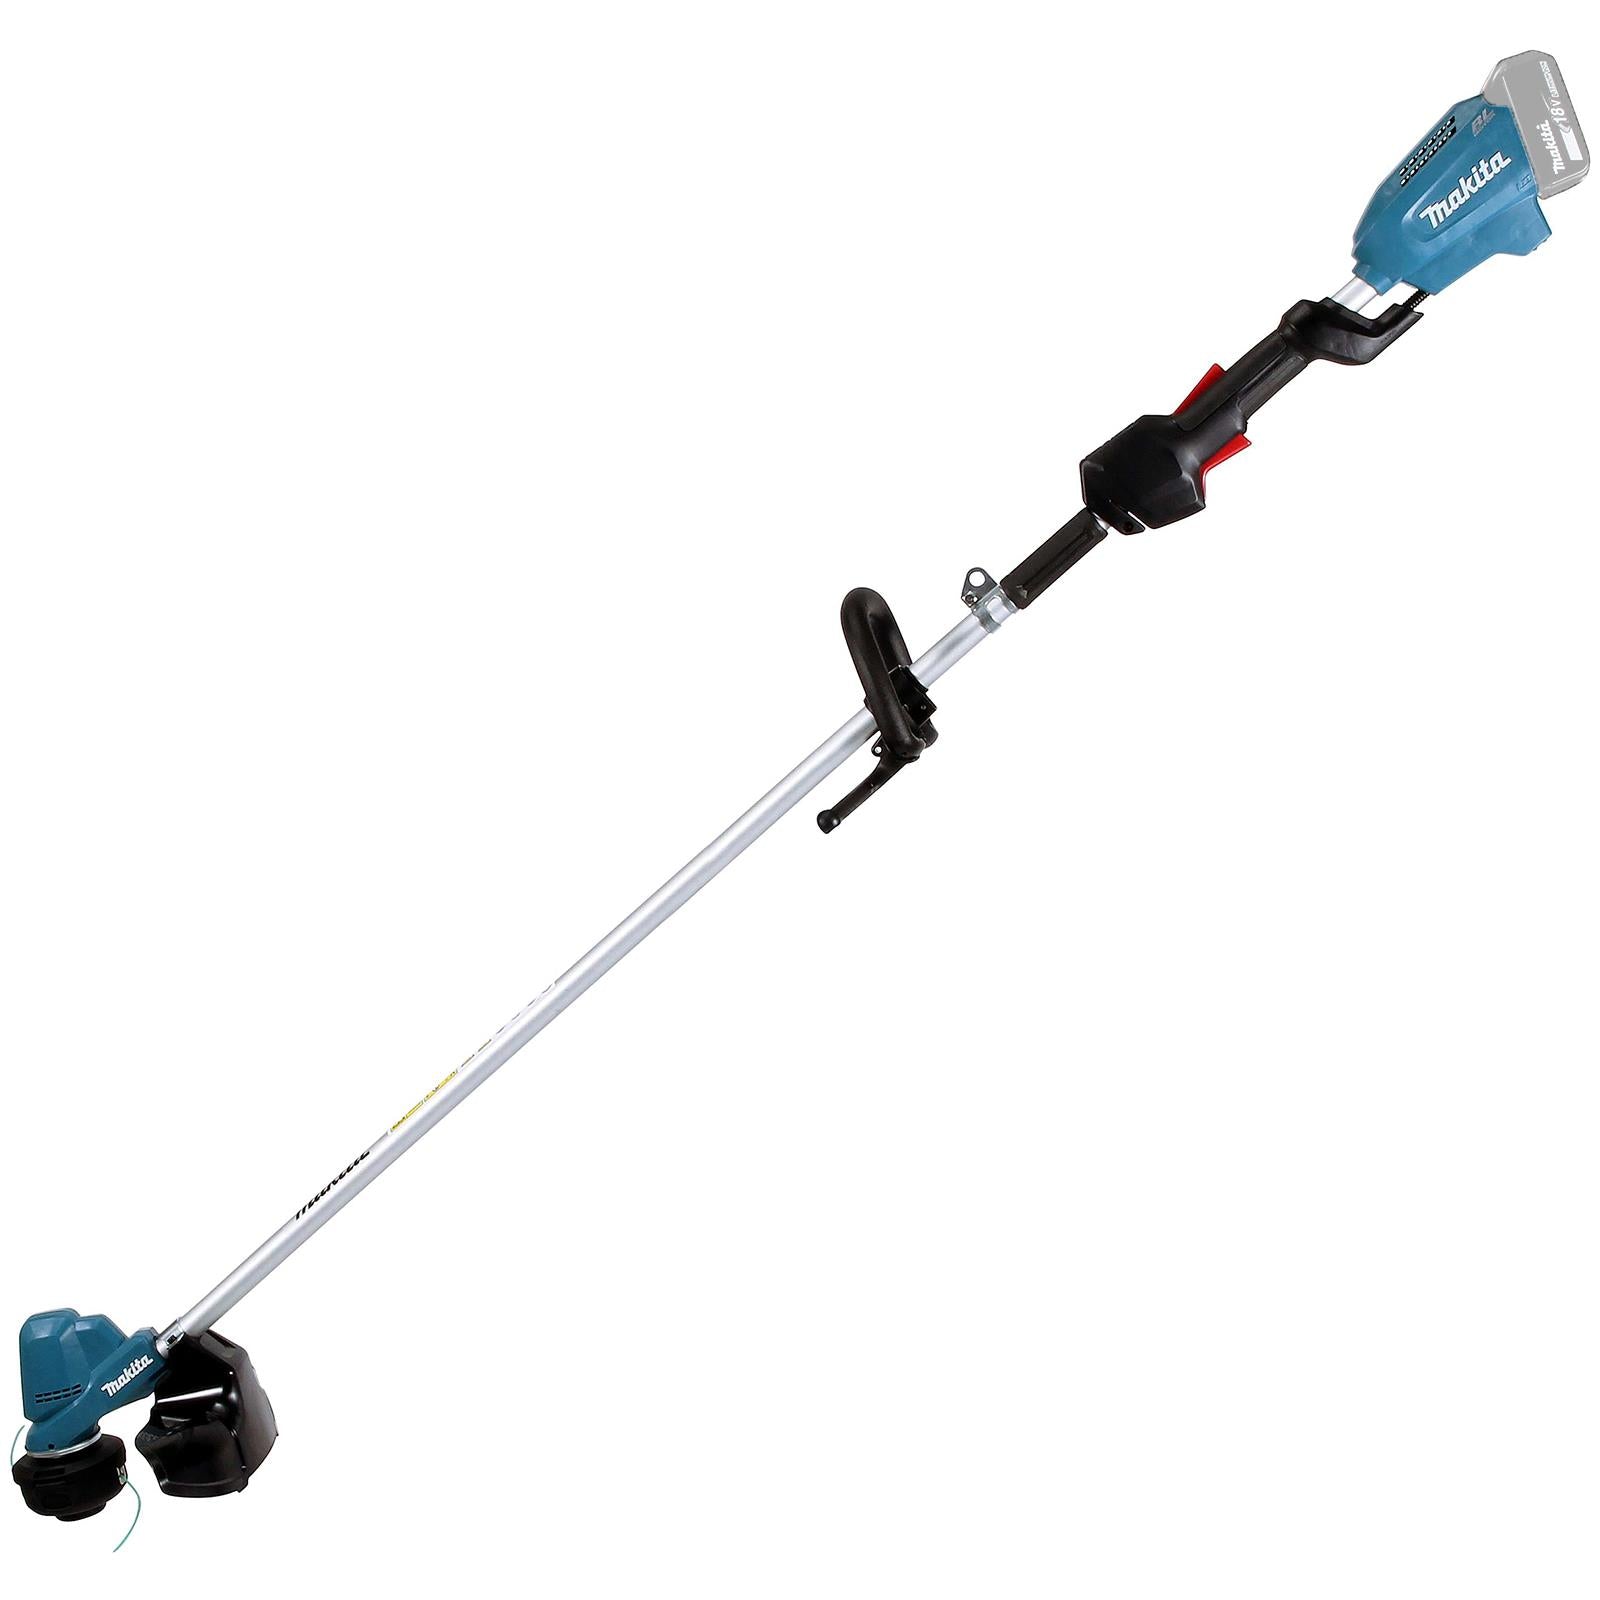 Makita Line Trimmer Strimmer 18V LXT Brushless Cordless Garden Lawn Strimming Bare Unit Body Only DUR190LZX3